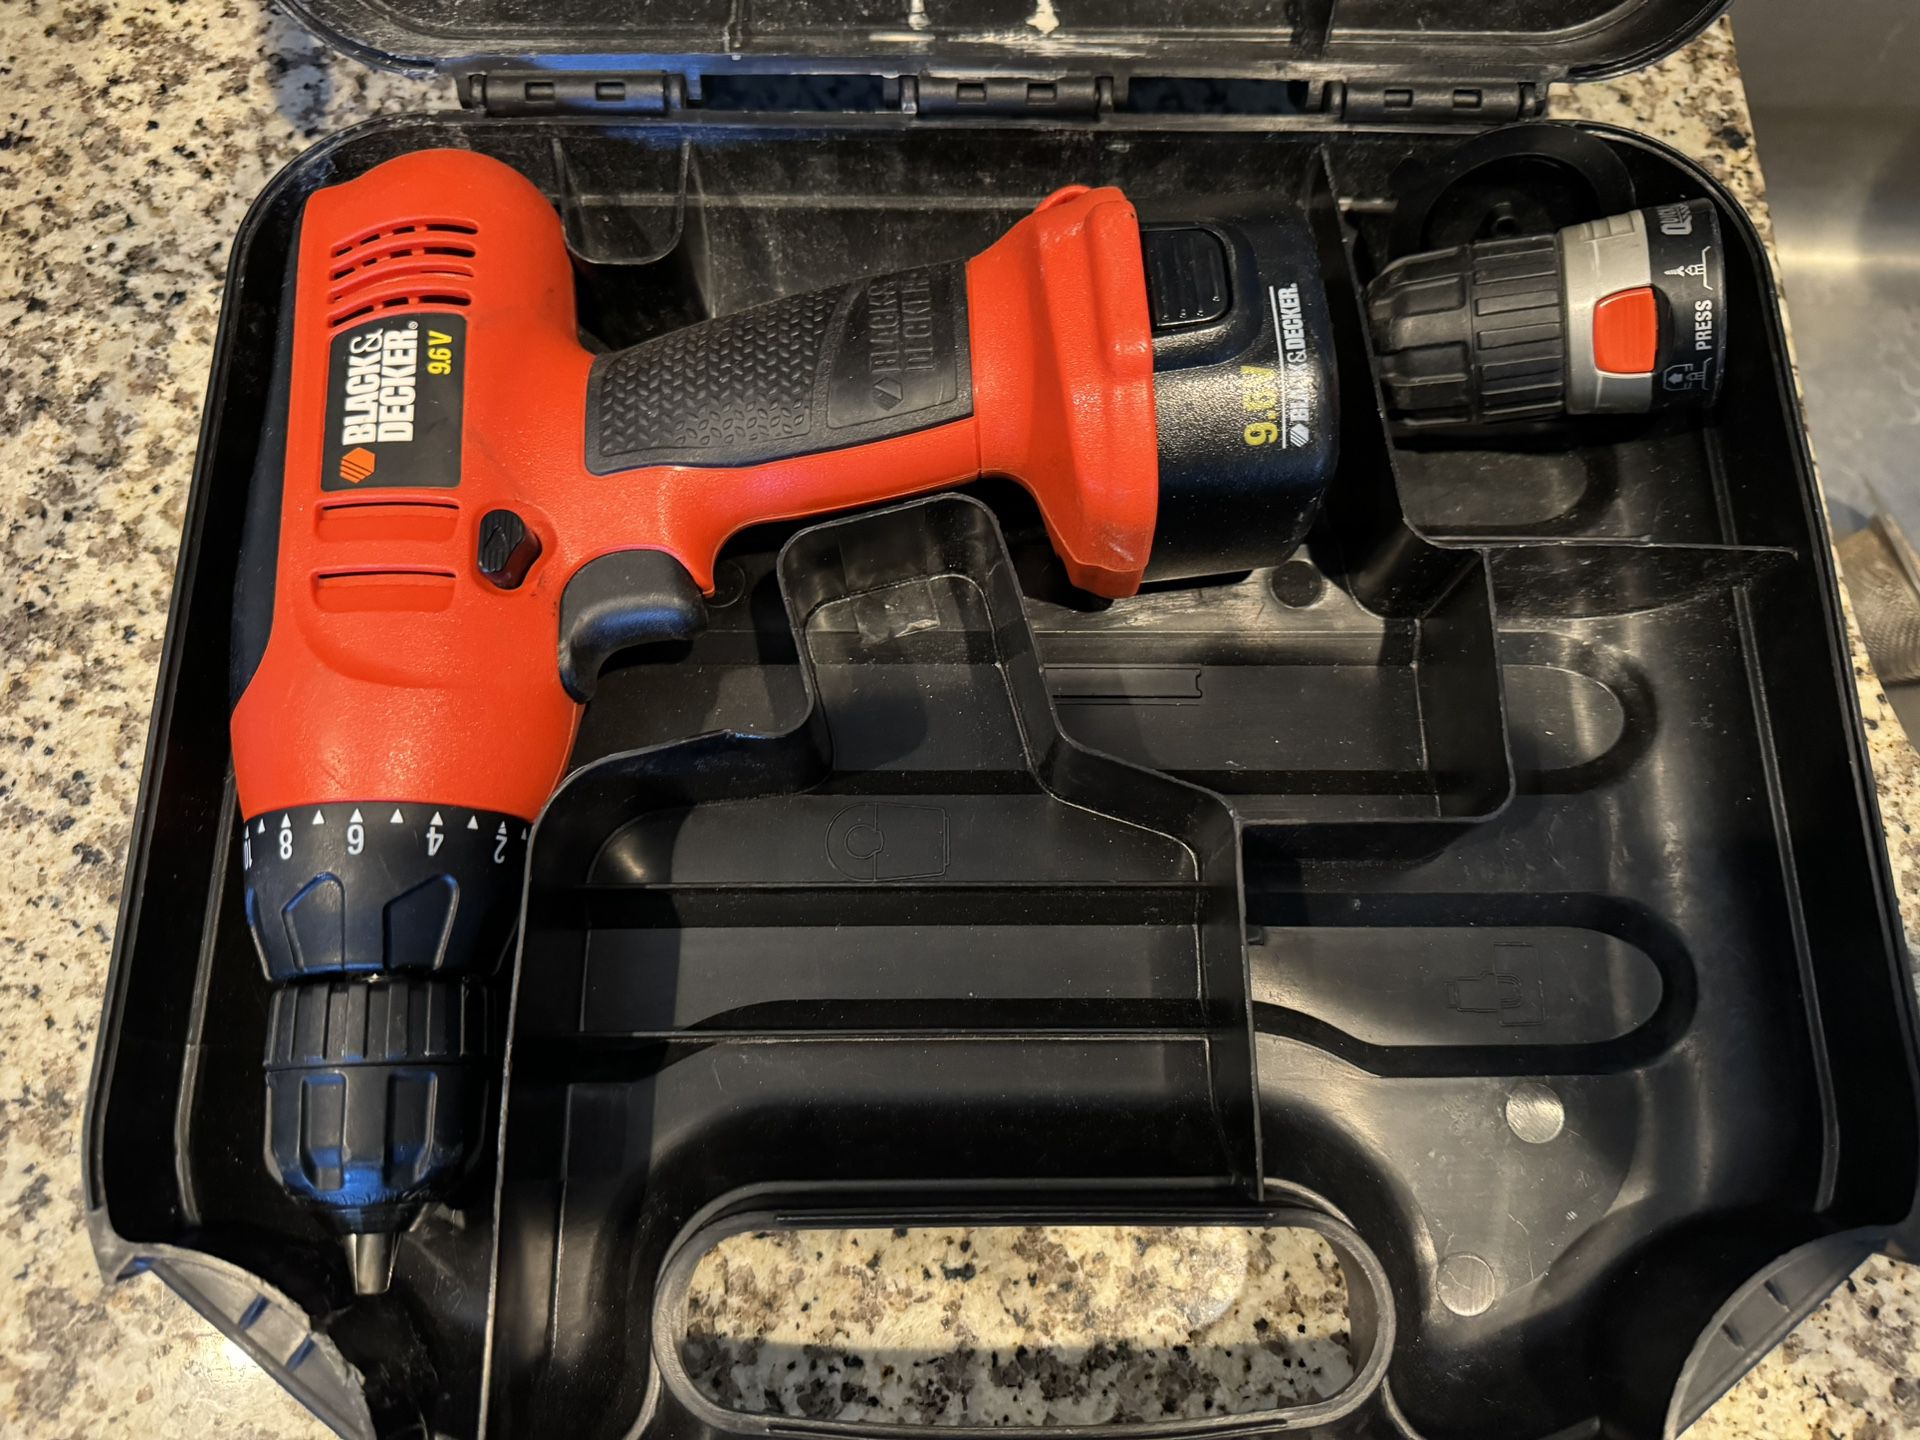 BLACK AND DECKER 9.6V CORDLESS DRILL CD9600 TYPE4